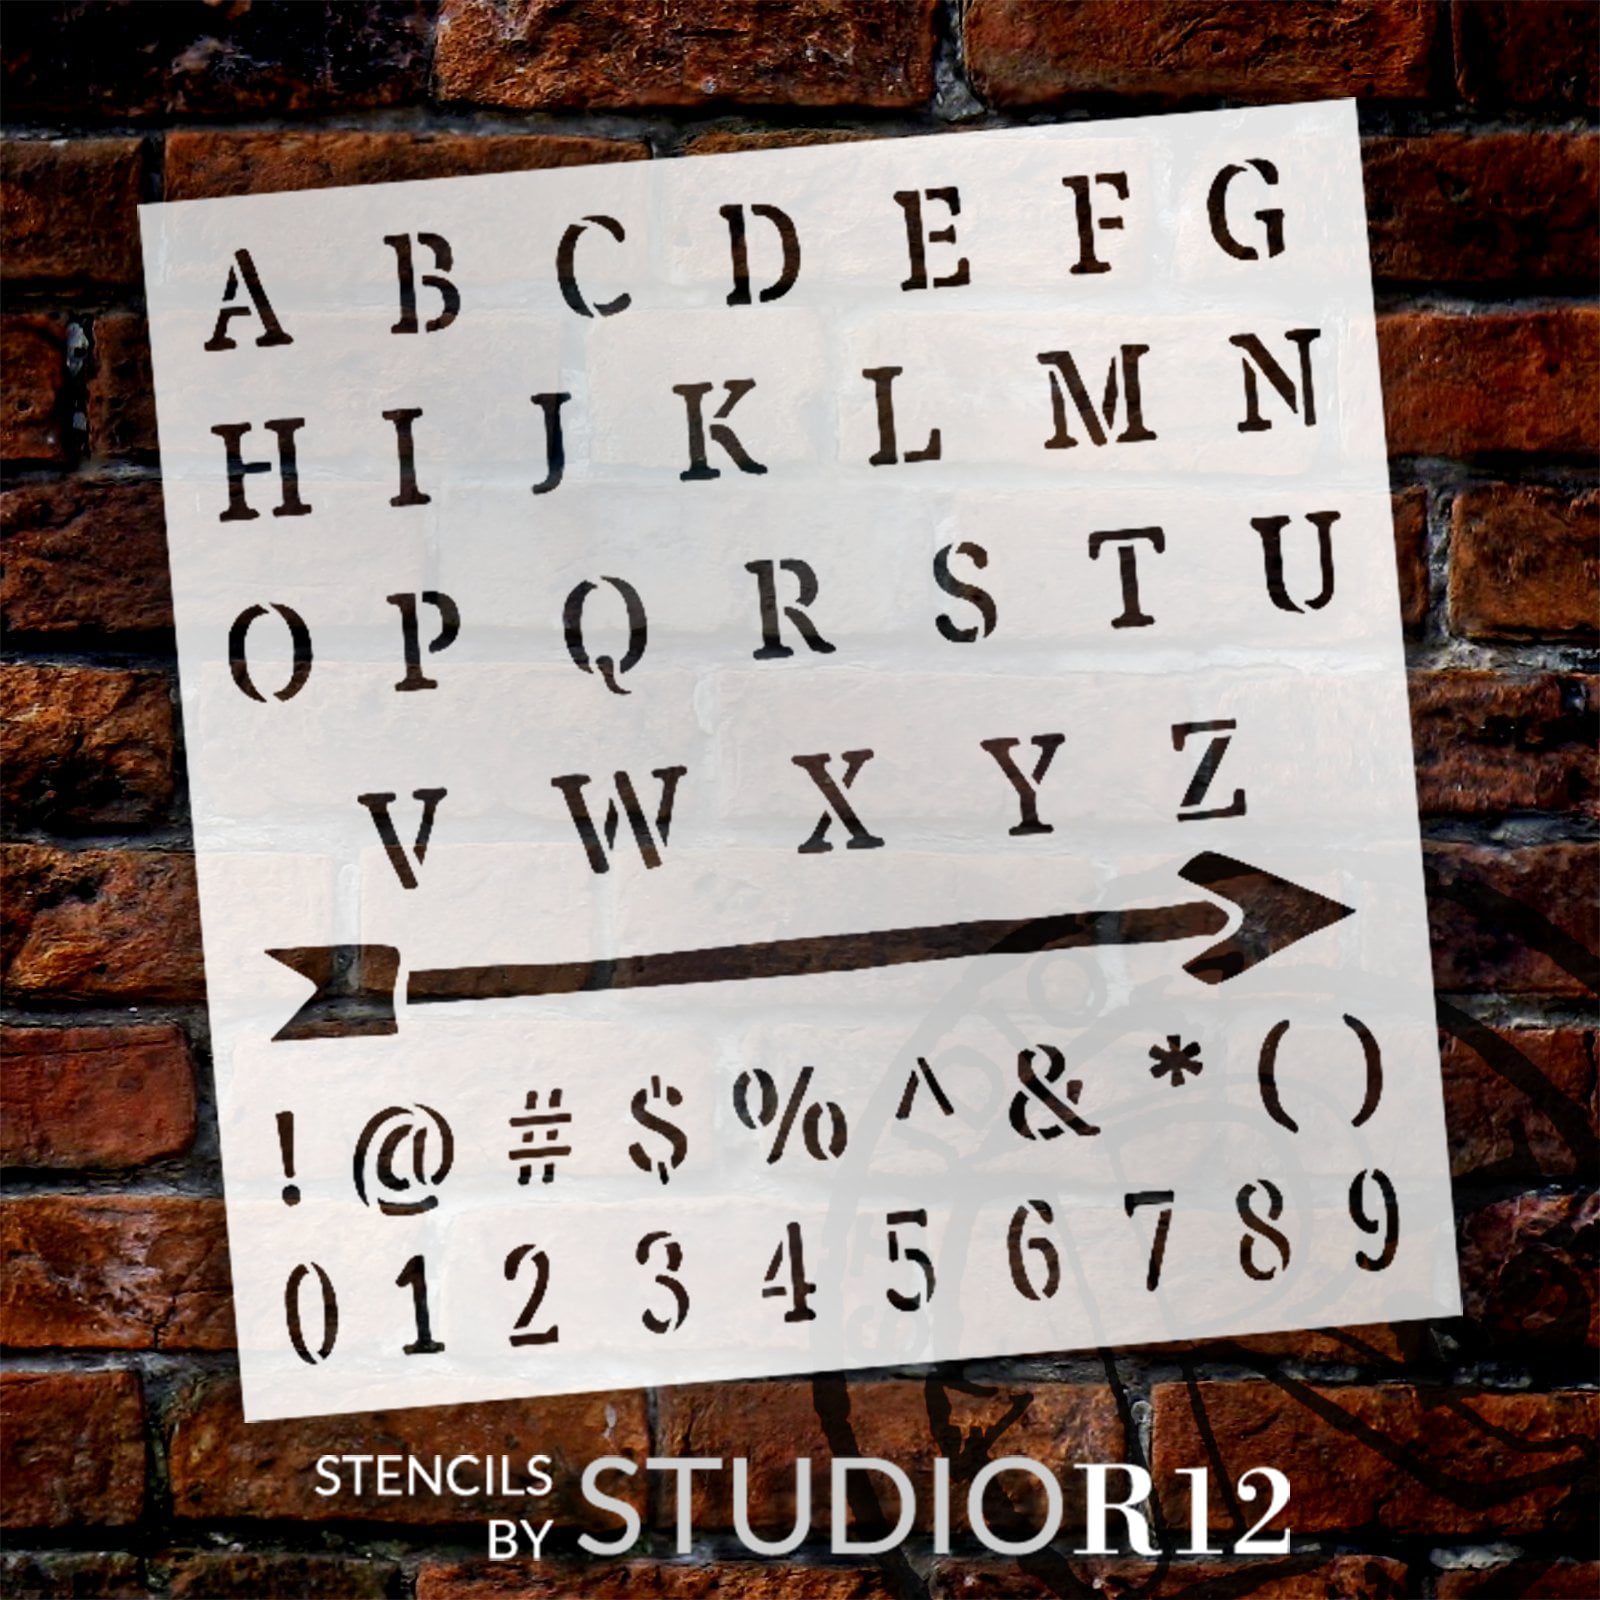 Stencil1 Letter Stencils 2 - Old English Calligraphy Letters & Numbers -  Mylar Uppercase and Lowercase Alphabet for Hand Painting, Drawing & Cutting